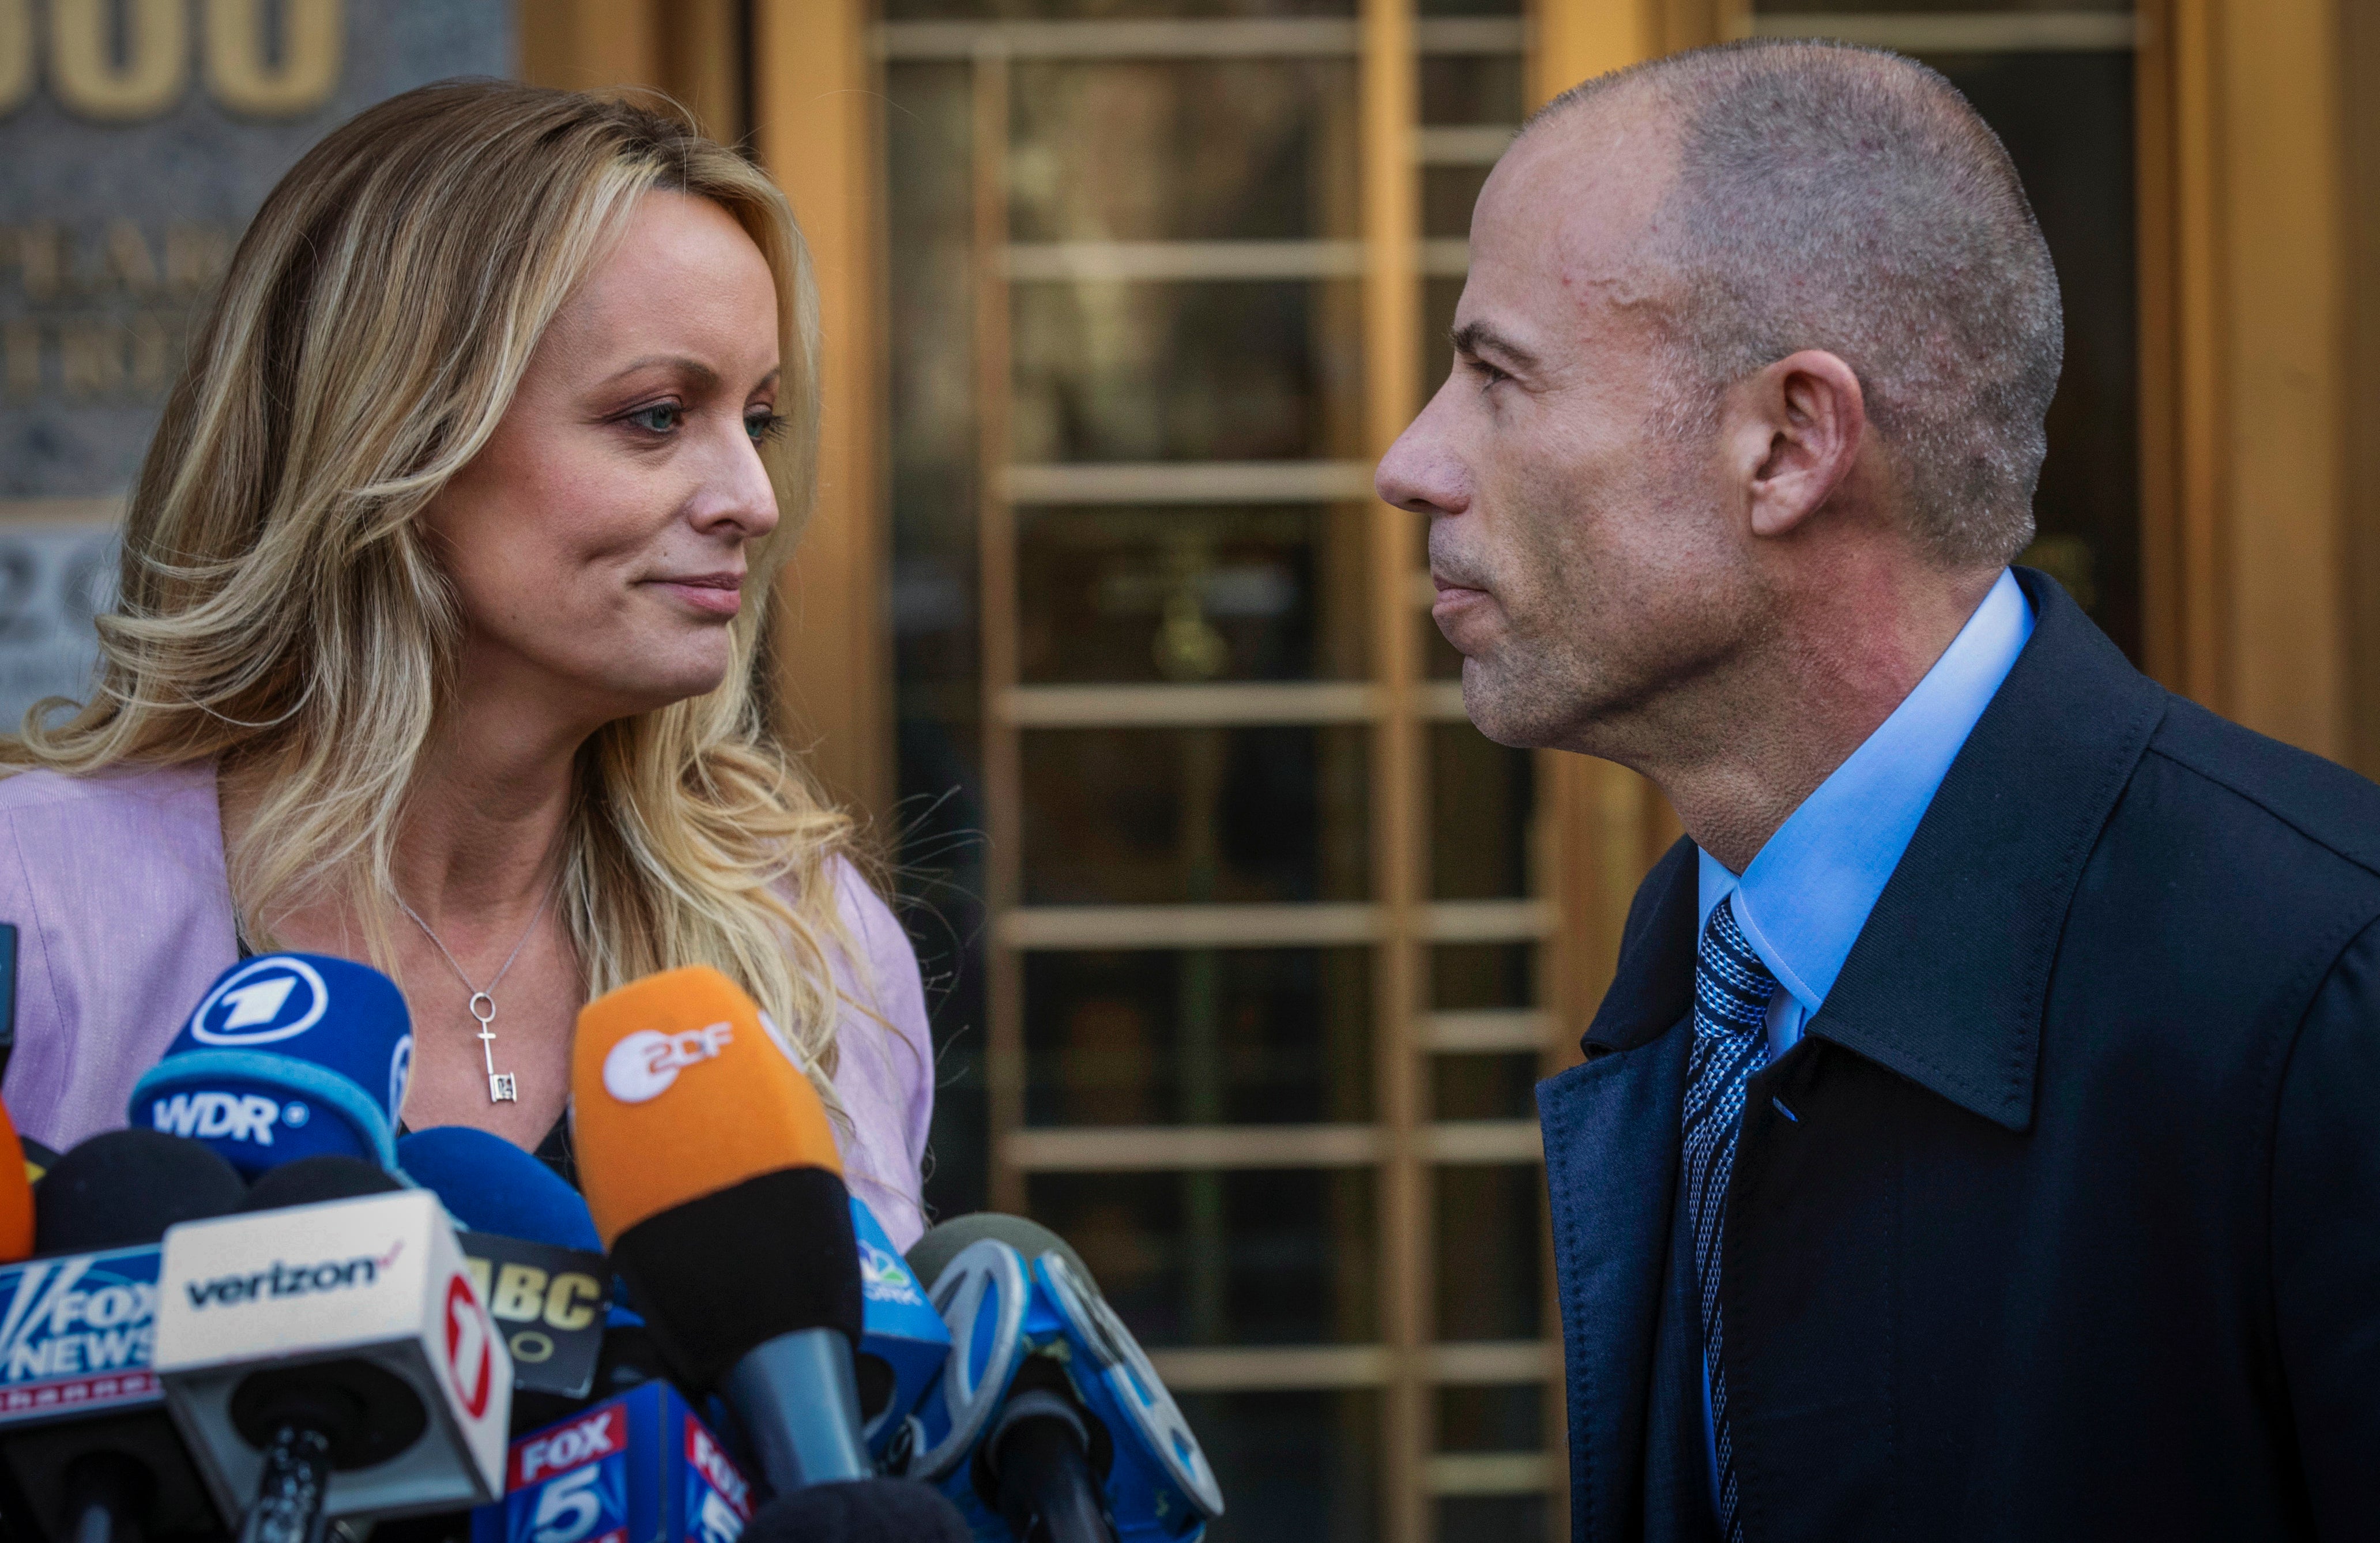 Stormy Daniels said she felt betrayed and humiliated by her ex attorney